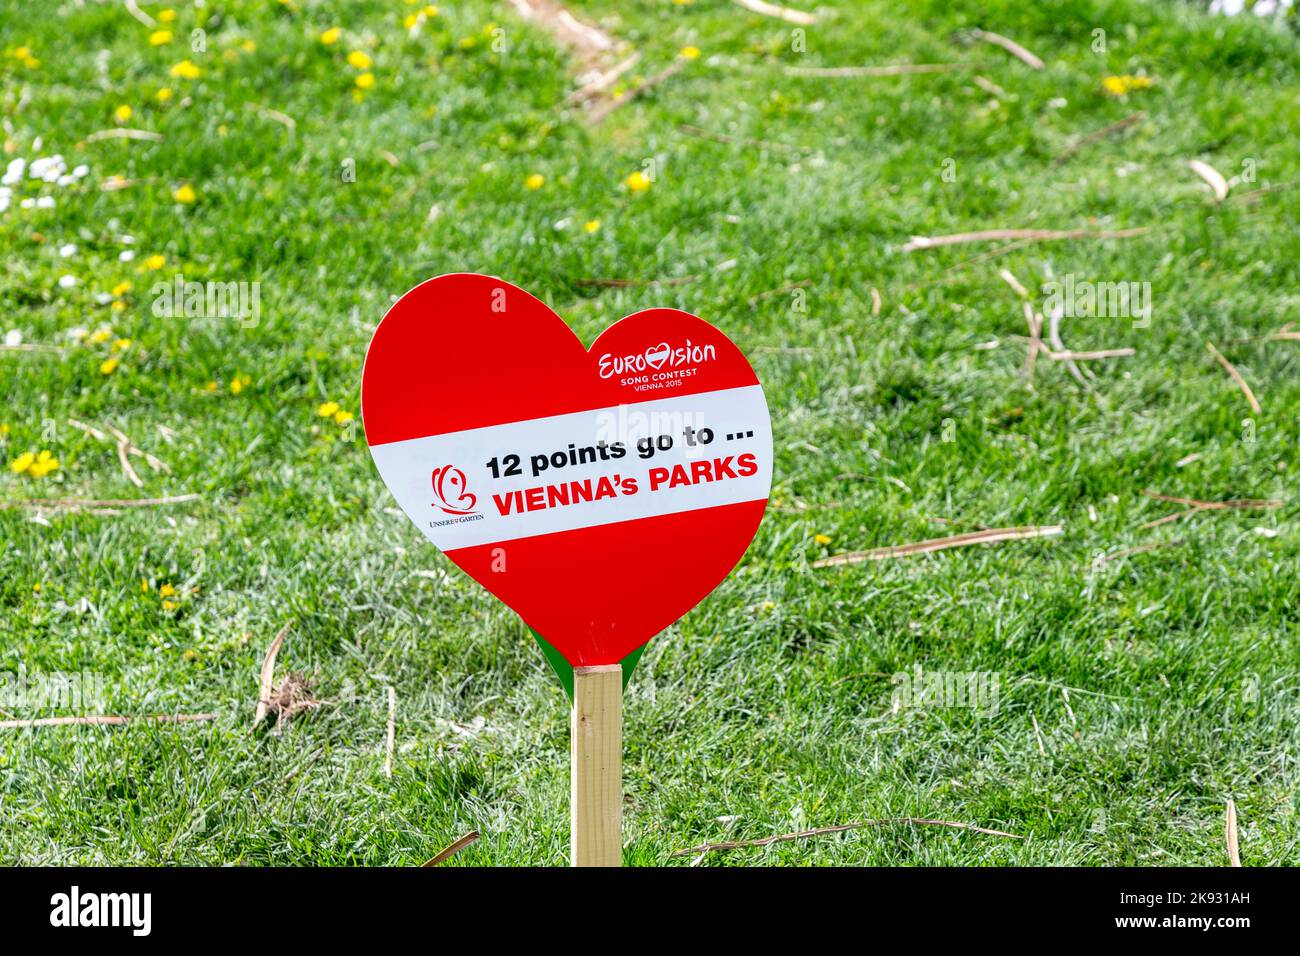 VIENNA, AUSTRIA - APR 27, 2015:  heart shape poster in the park for the european song contest in Vienna, Austria. Conchita Wurst was the winner in the Stock Photo